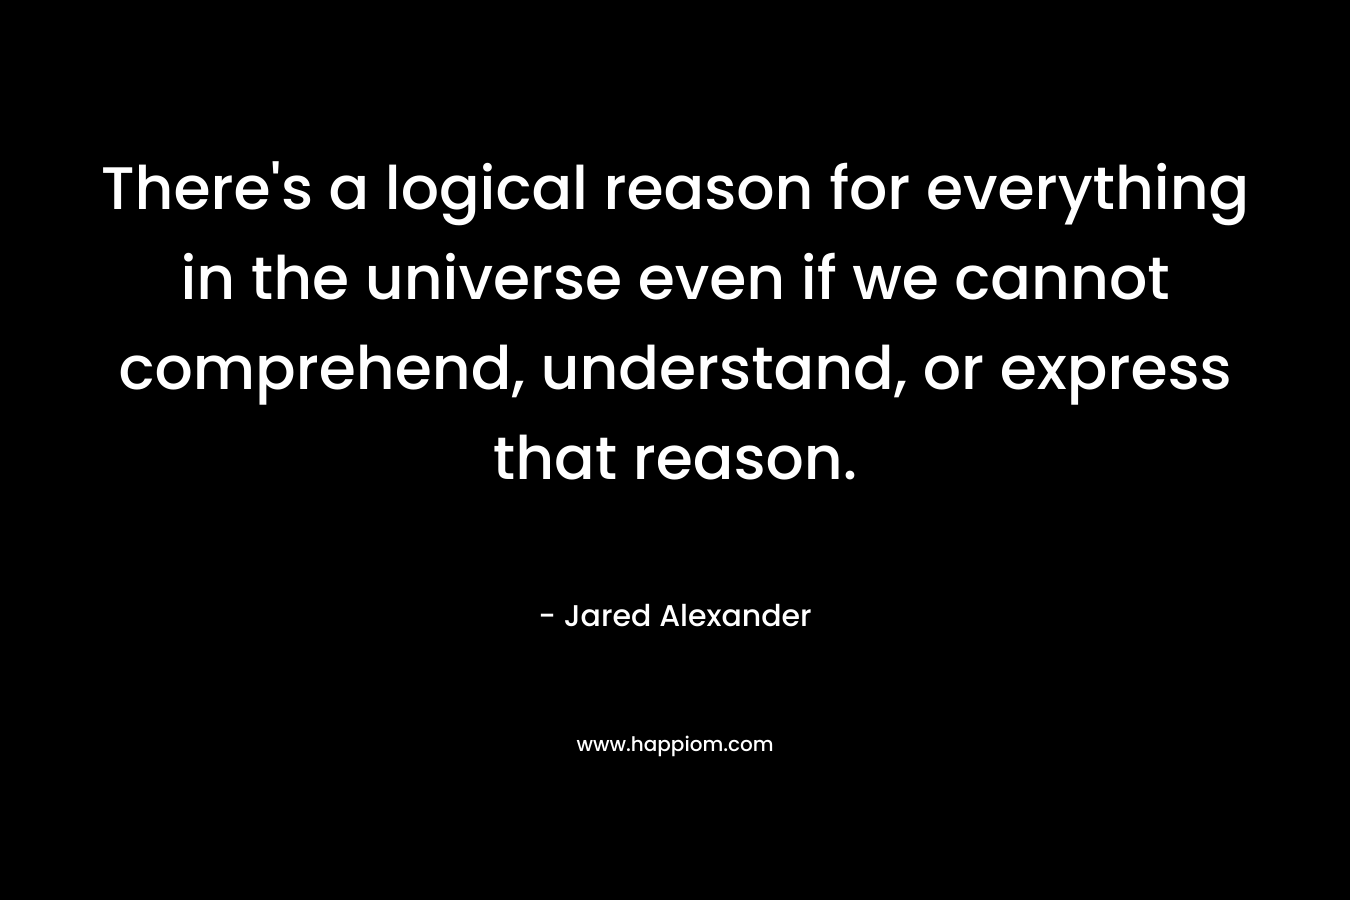 There's a logical reason for everything in the universe even if we cannot comprehend, understand, or express that reason.